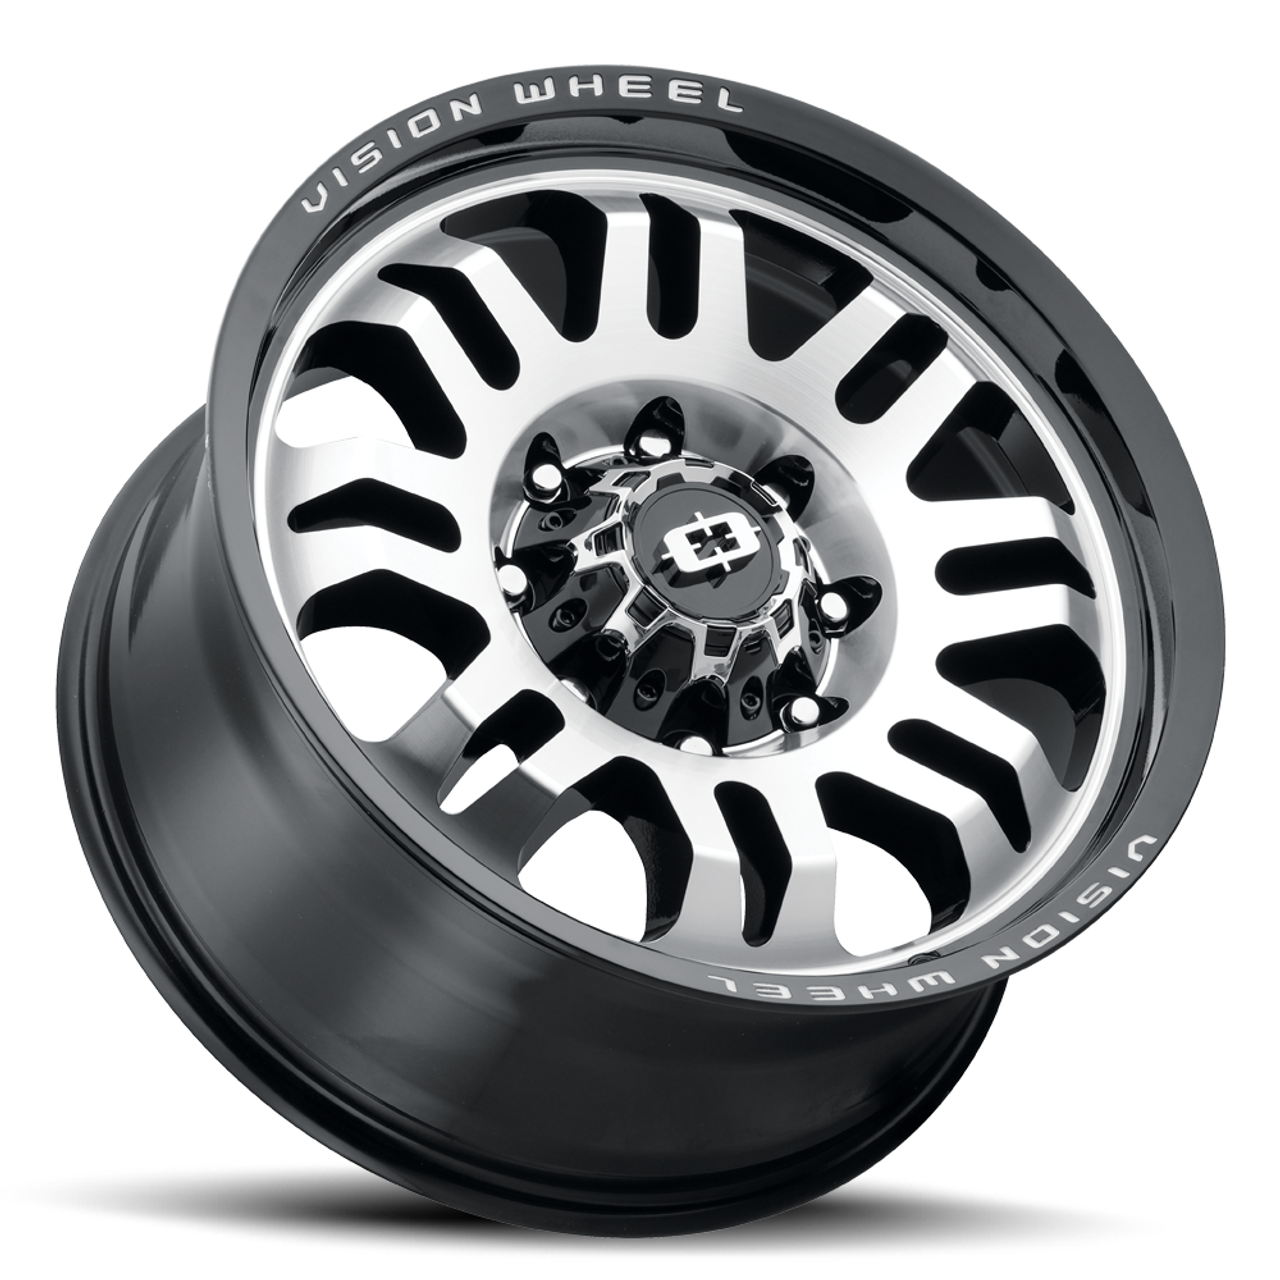 Set 4 17" Vision 409 Inferno Gloss Black Machined 6x120 Wheel 12mm For GMC Chevy